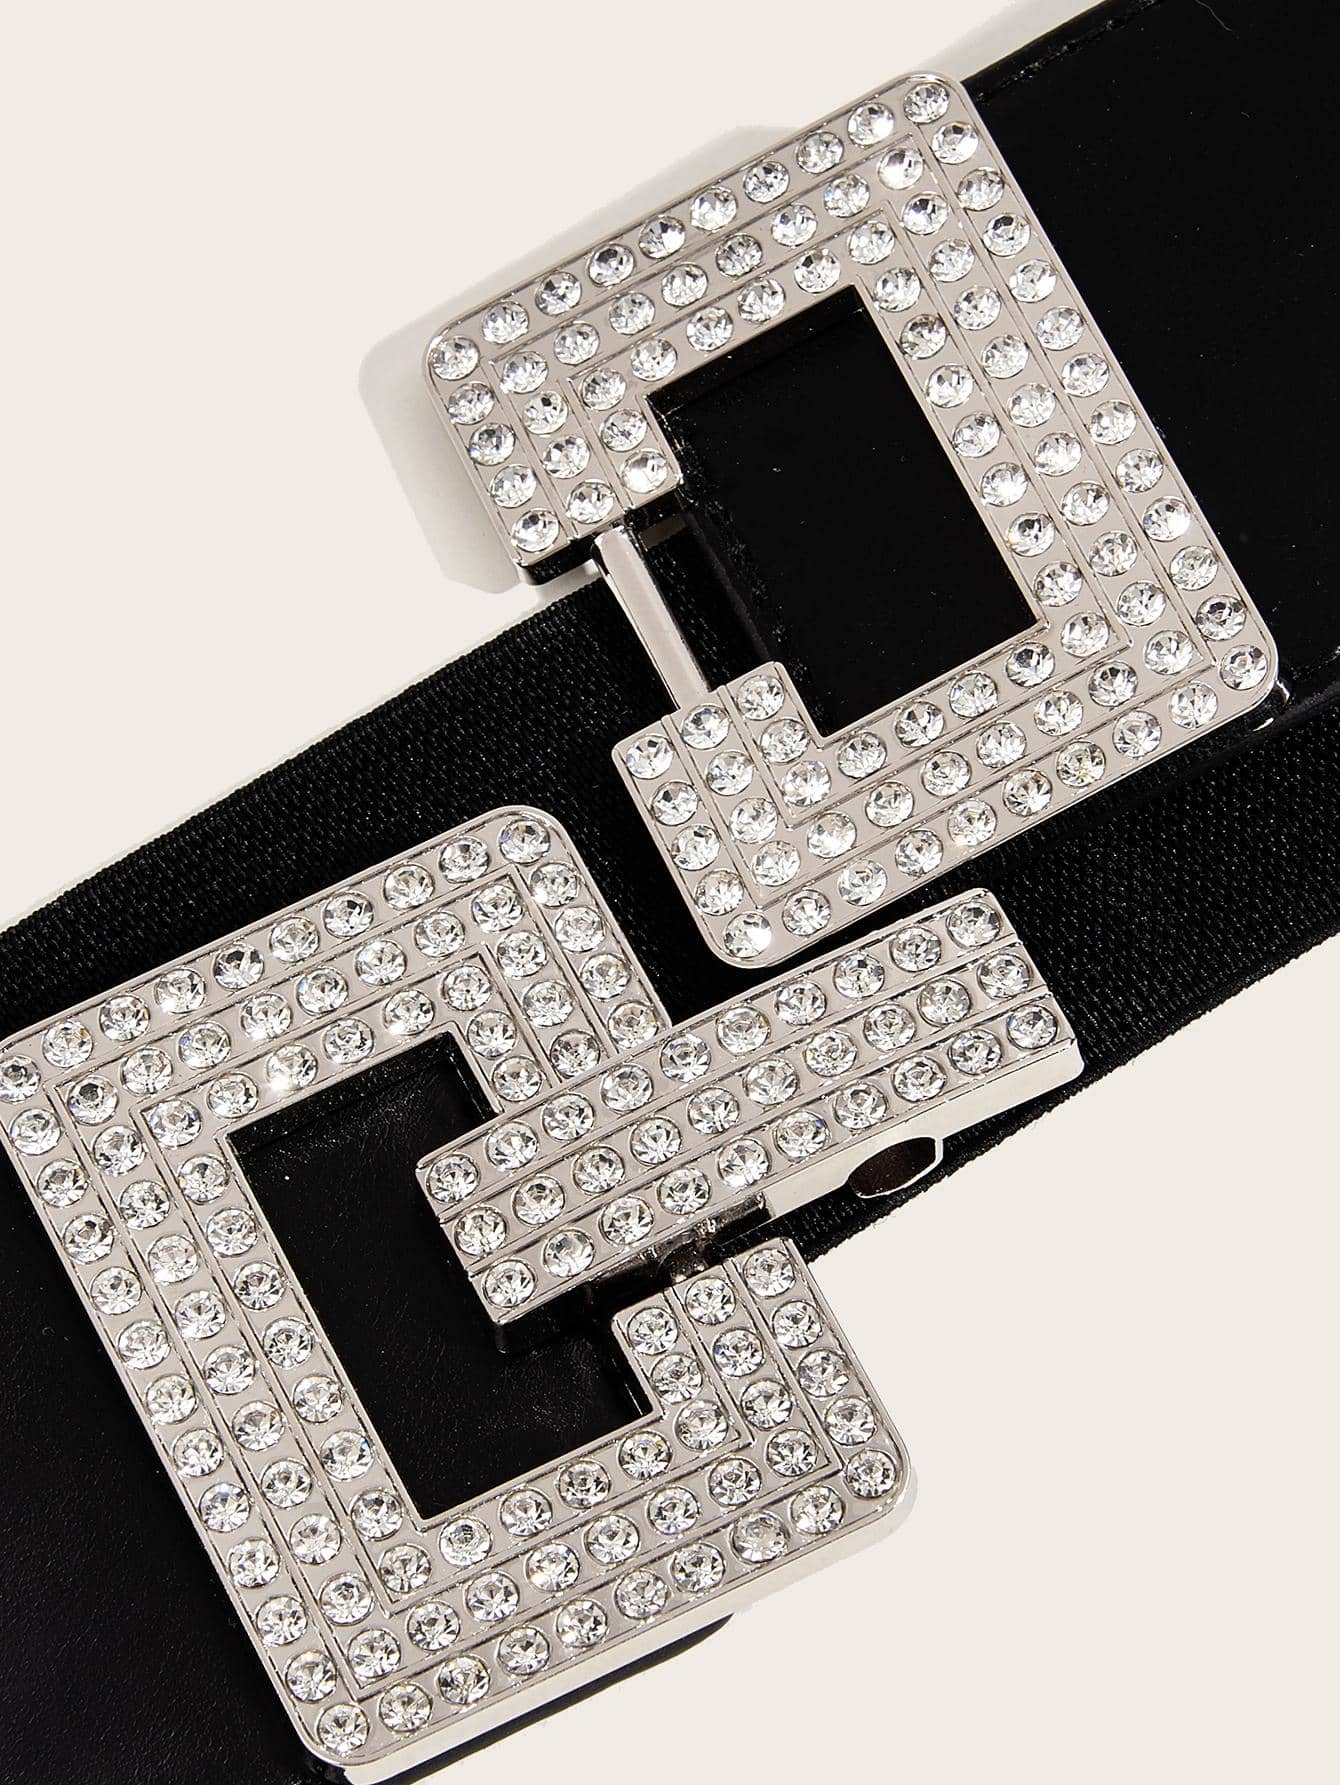 1pc Women's Fashionable Elastic Waistband Decorated Dress Belt With Square Shaped Buckle & Rhinestone Detail, Suitable For Daily And Party Use - Negative Apparel